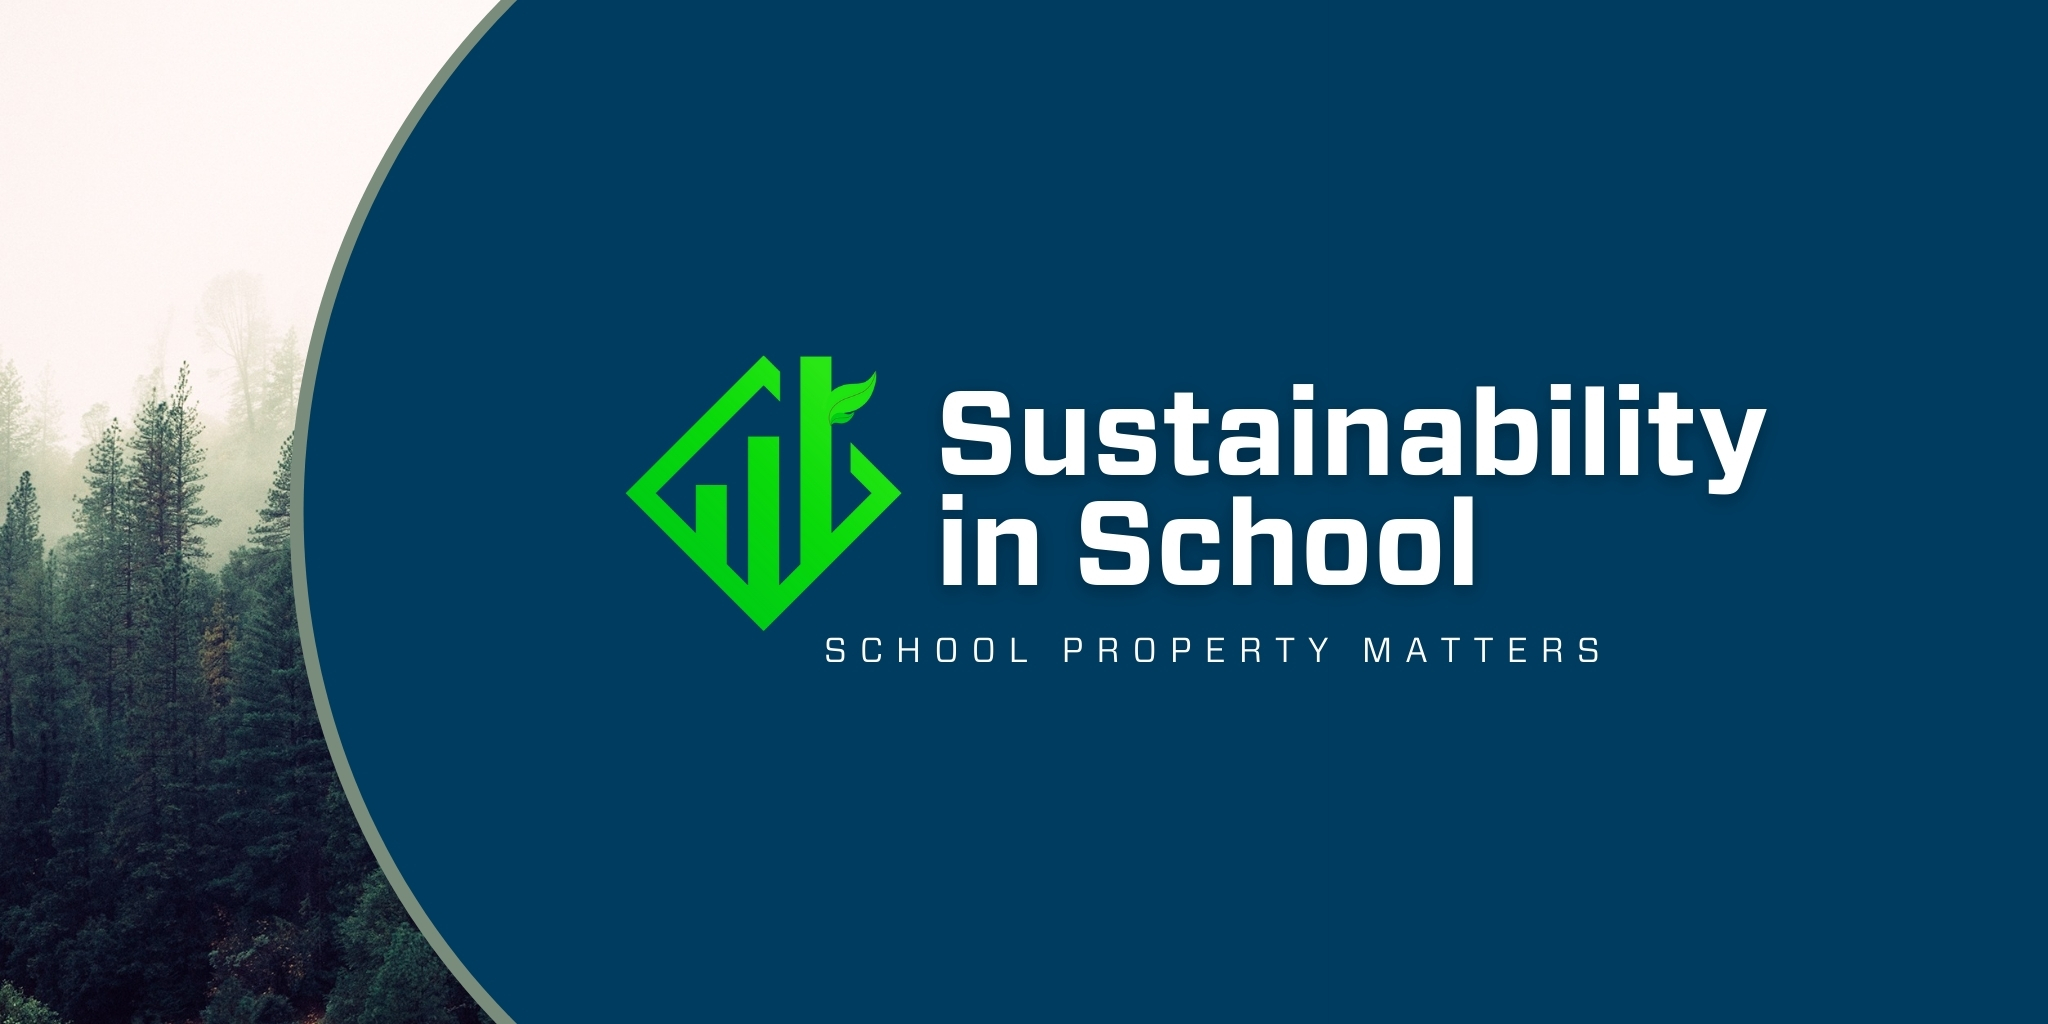 Why do school estates need to take a whole life carbon approach to their sustainability strategy?